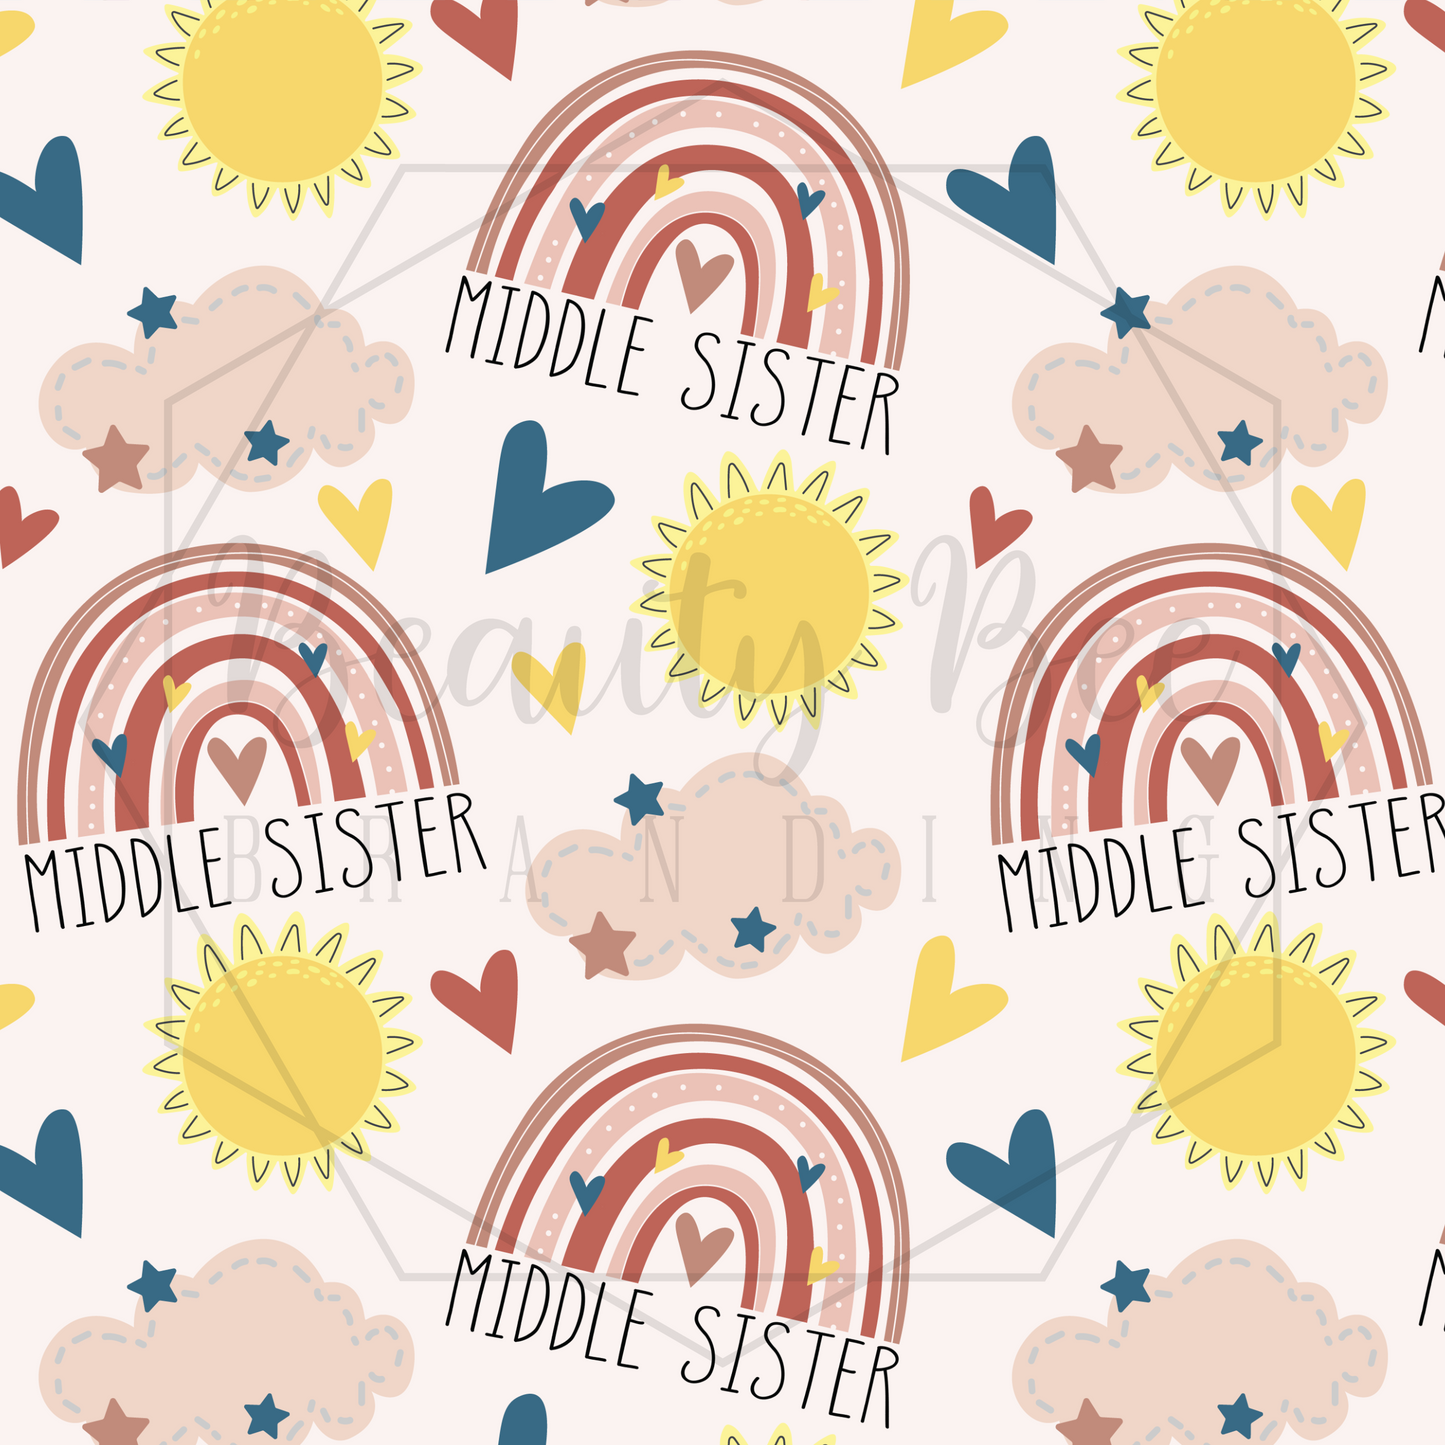 Middle Sister Rainbows SEAMLESS PATTERN